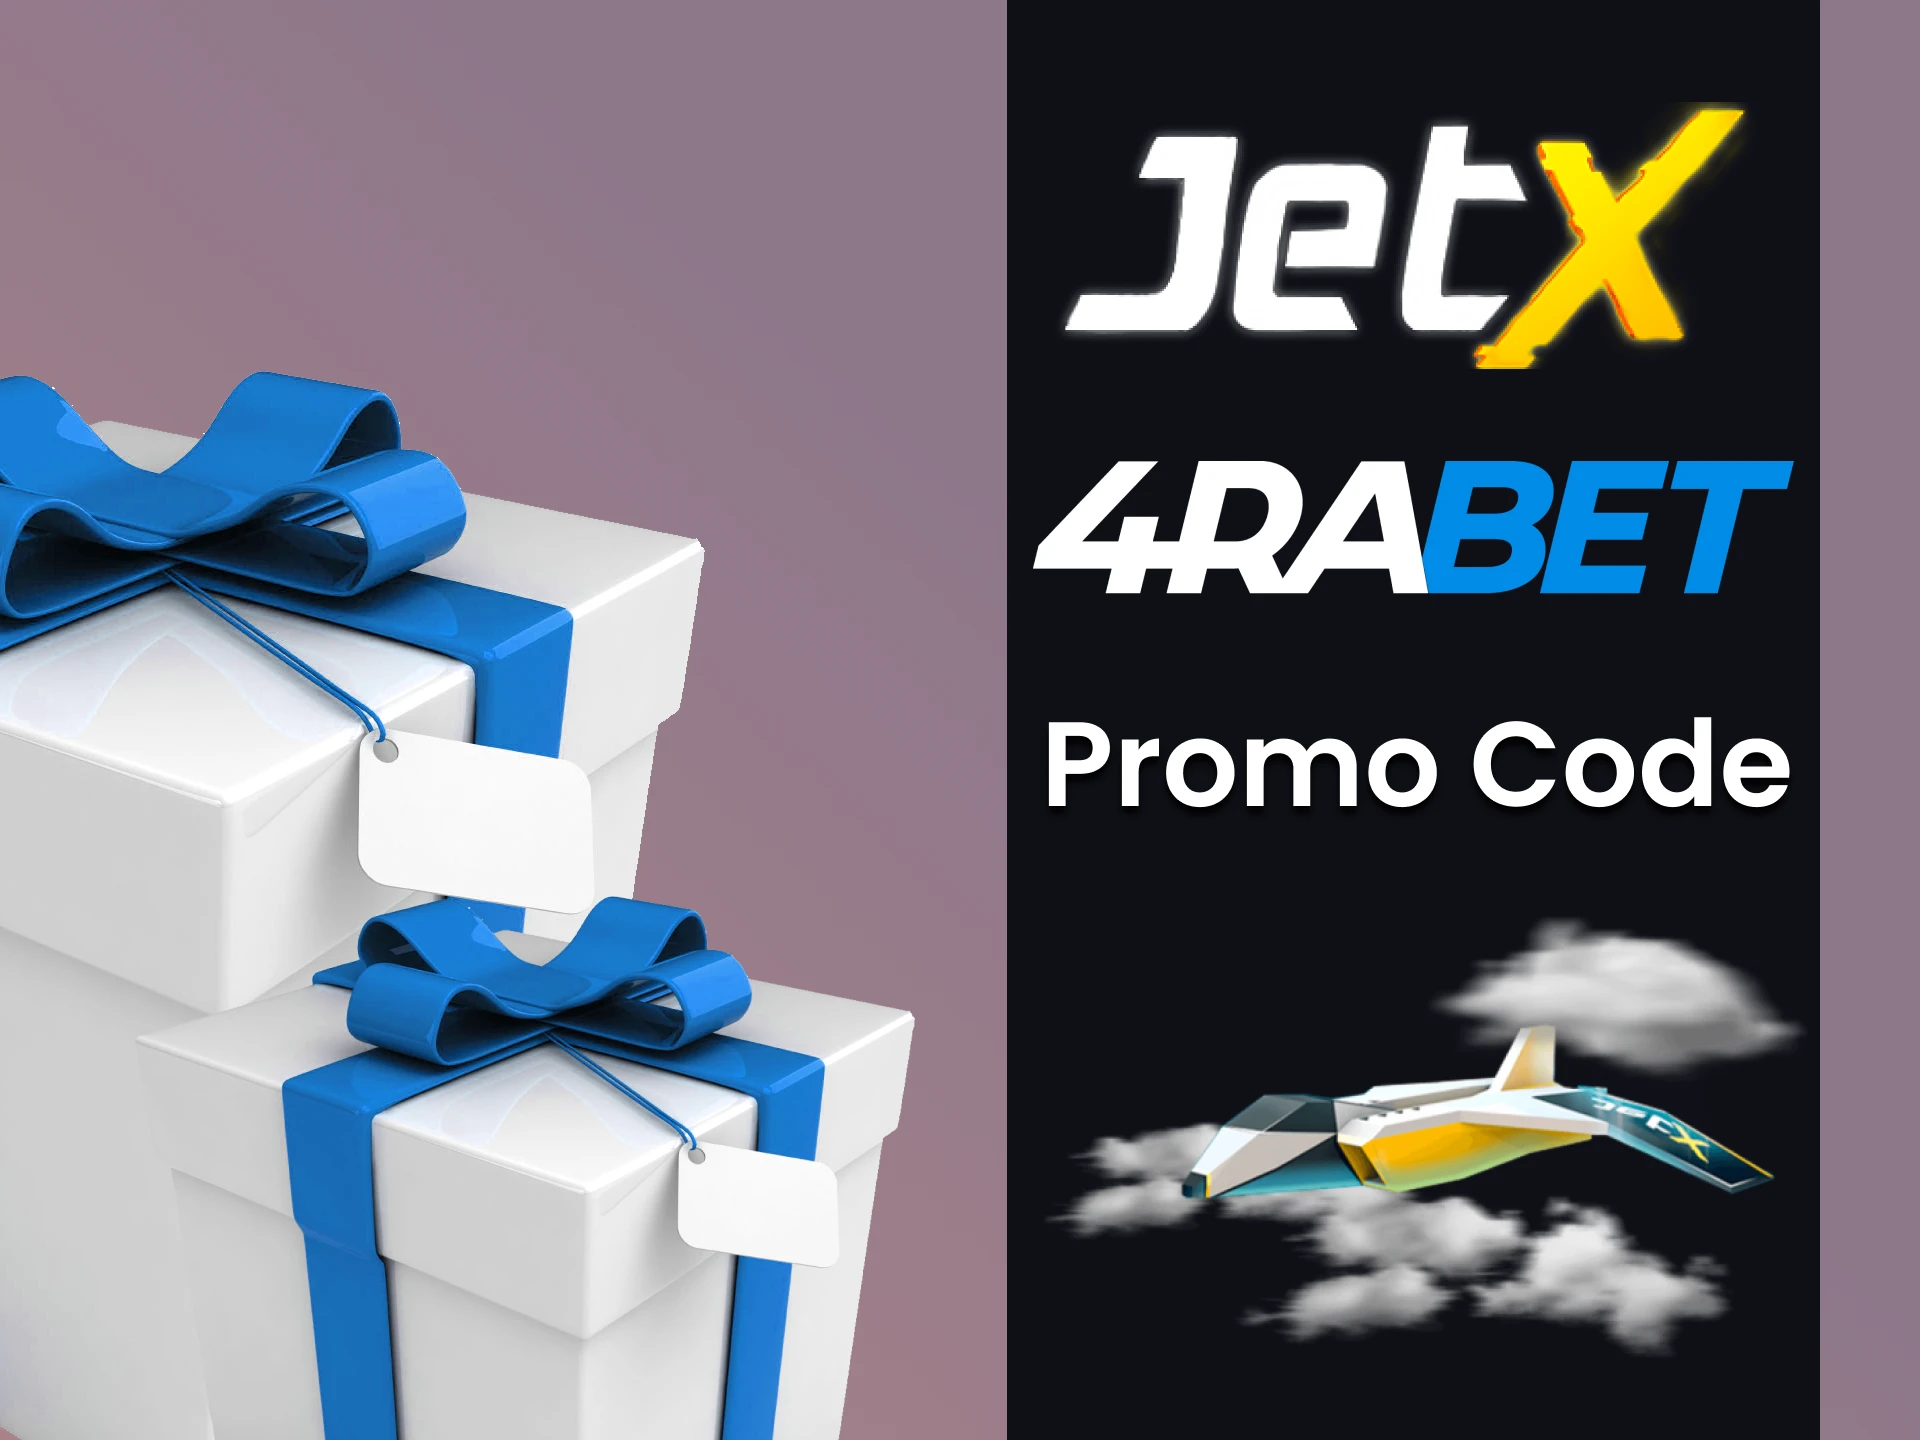 Use the bonus code for JetX from 4rabet.